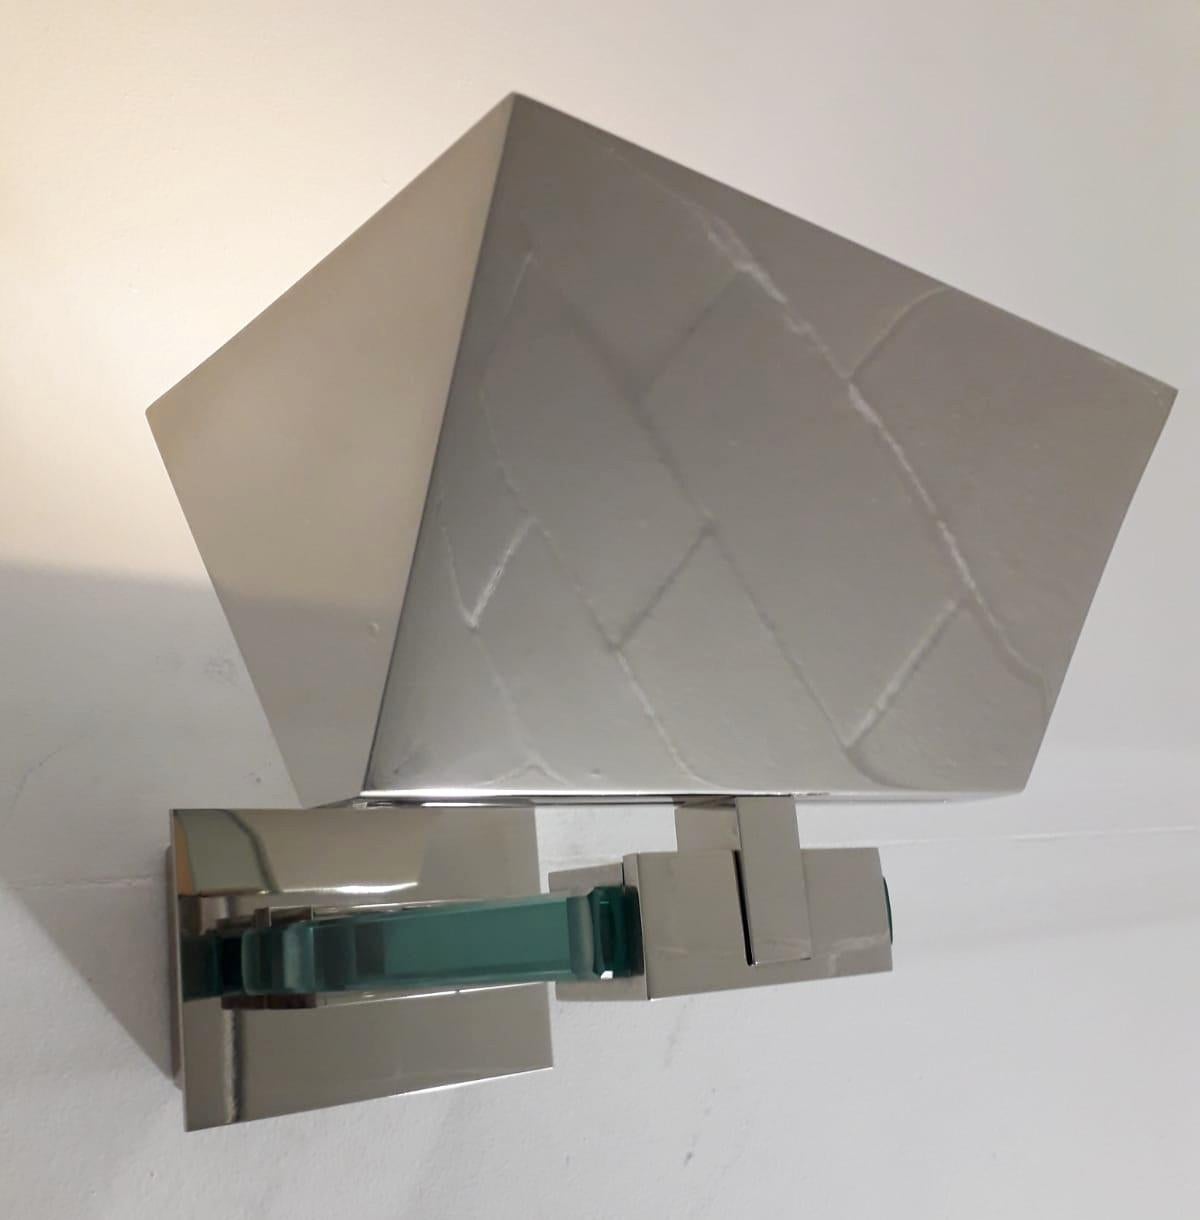 Italian Art Deco Sconce by Fratelli Martini - 8 available For Sale